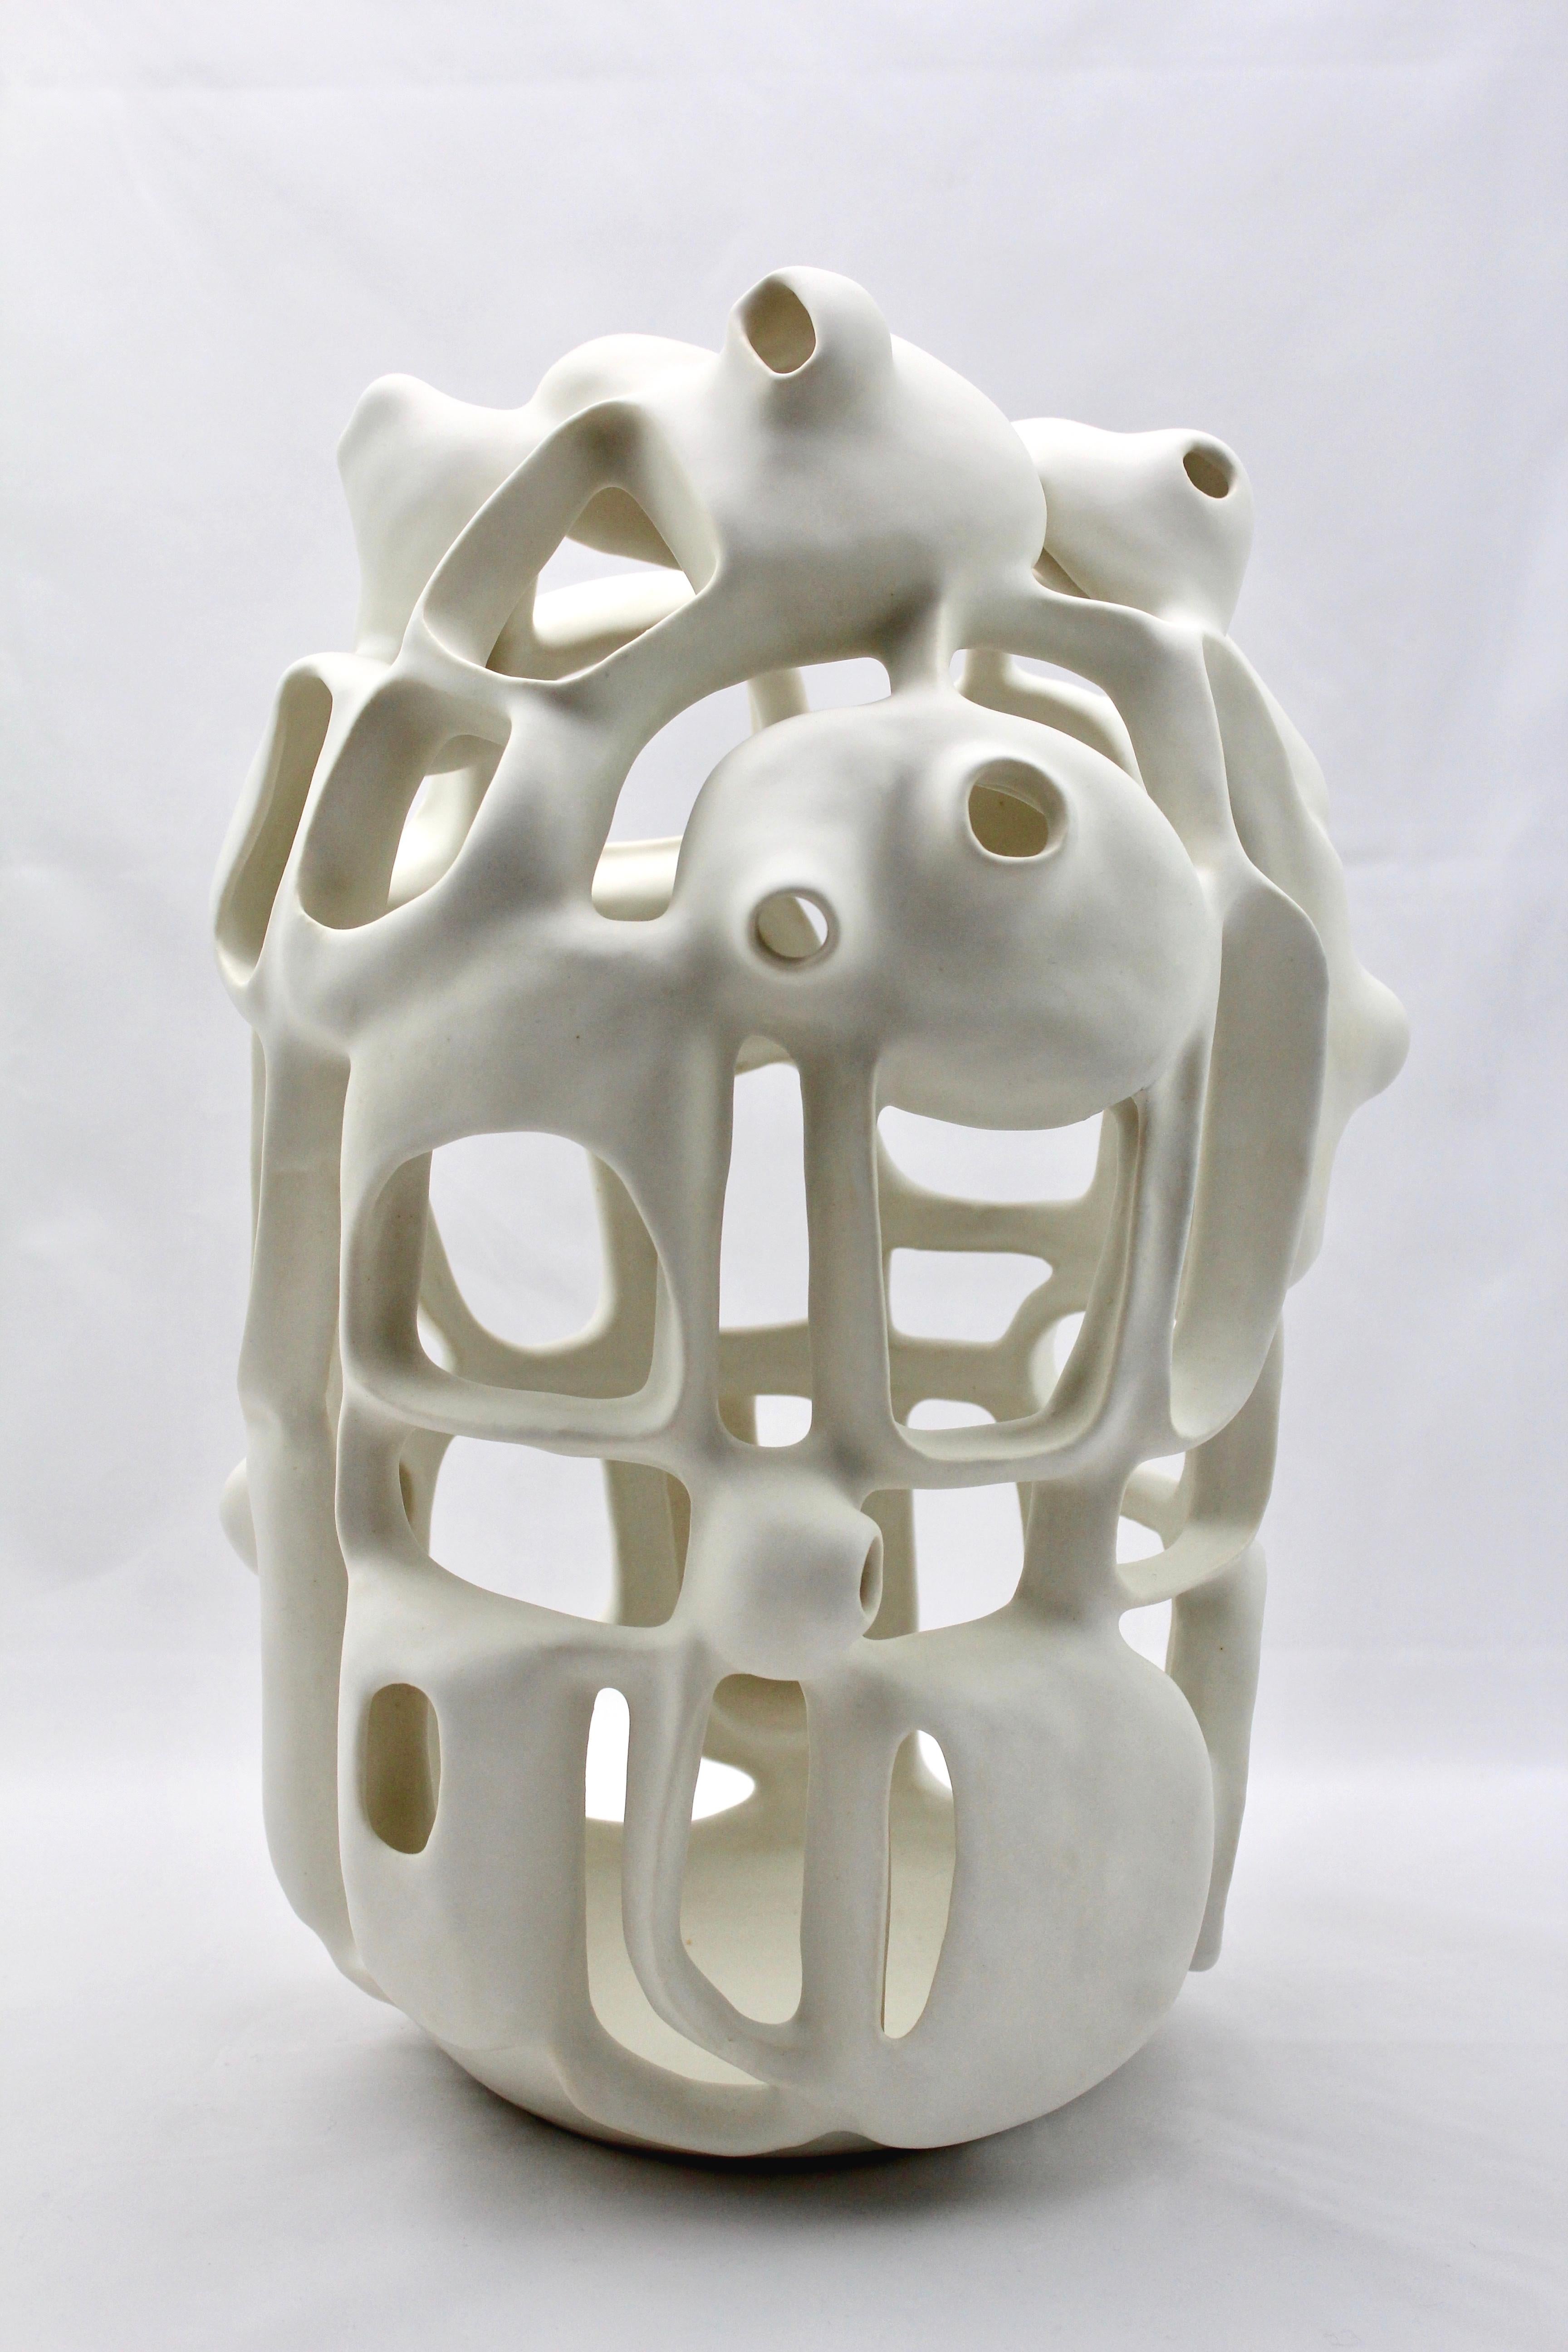 Joan Lurie Abstract Sculpture - Untitled #5 - abstract geometric, organic white glazed porcelain sculpture 